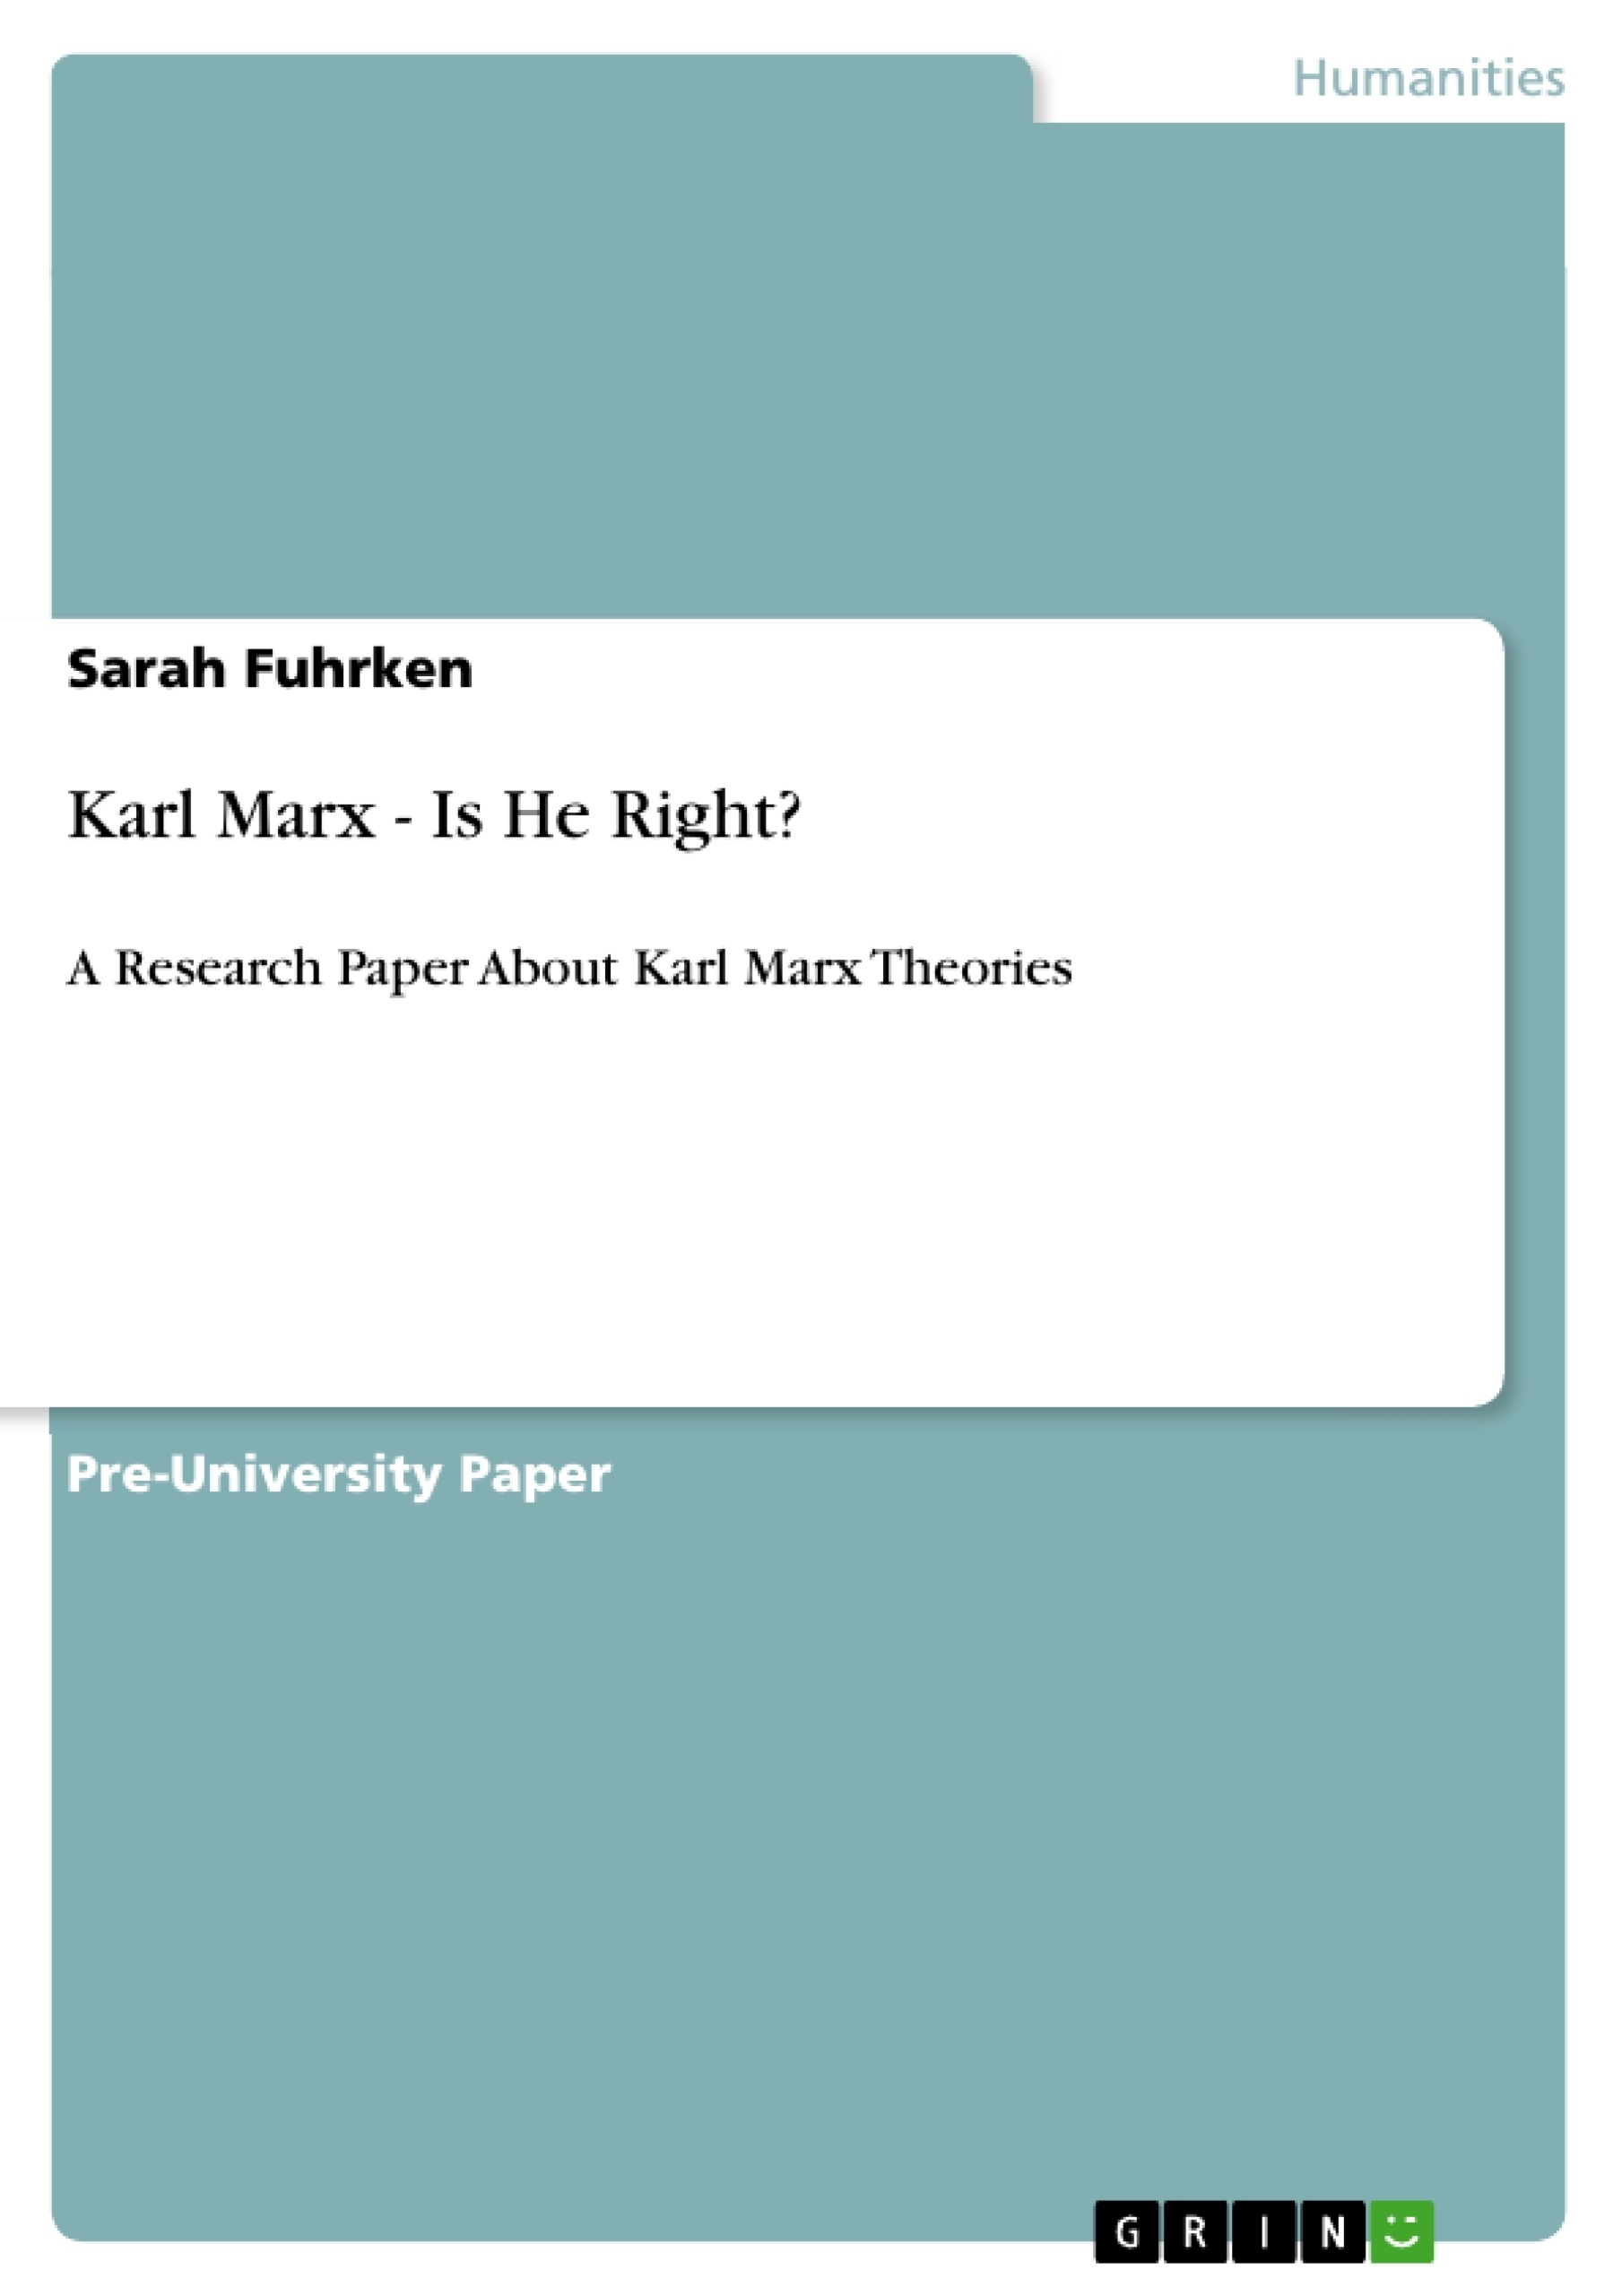 Title: Karl Marx - Is He Right?